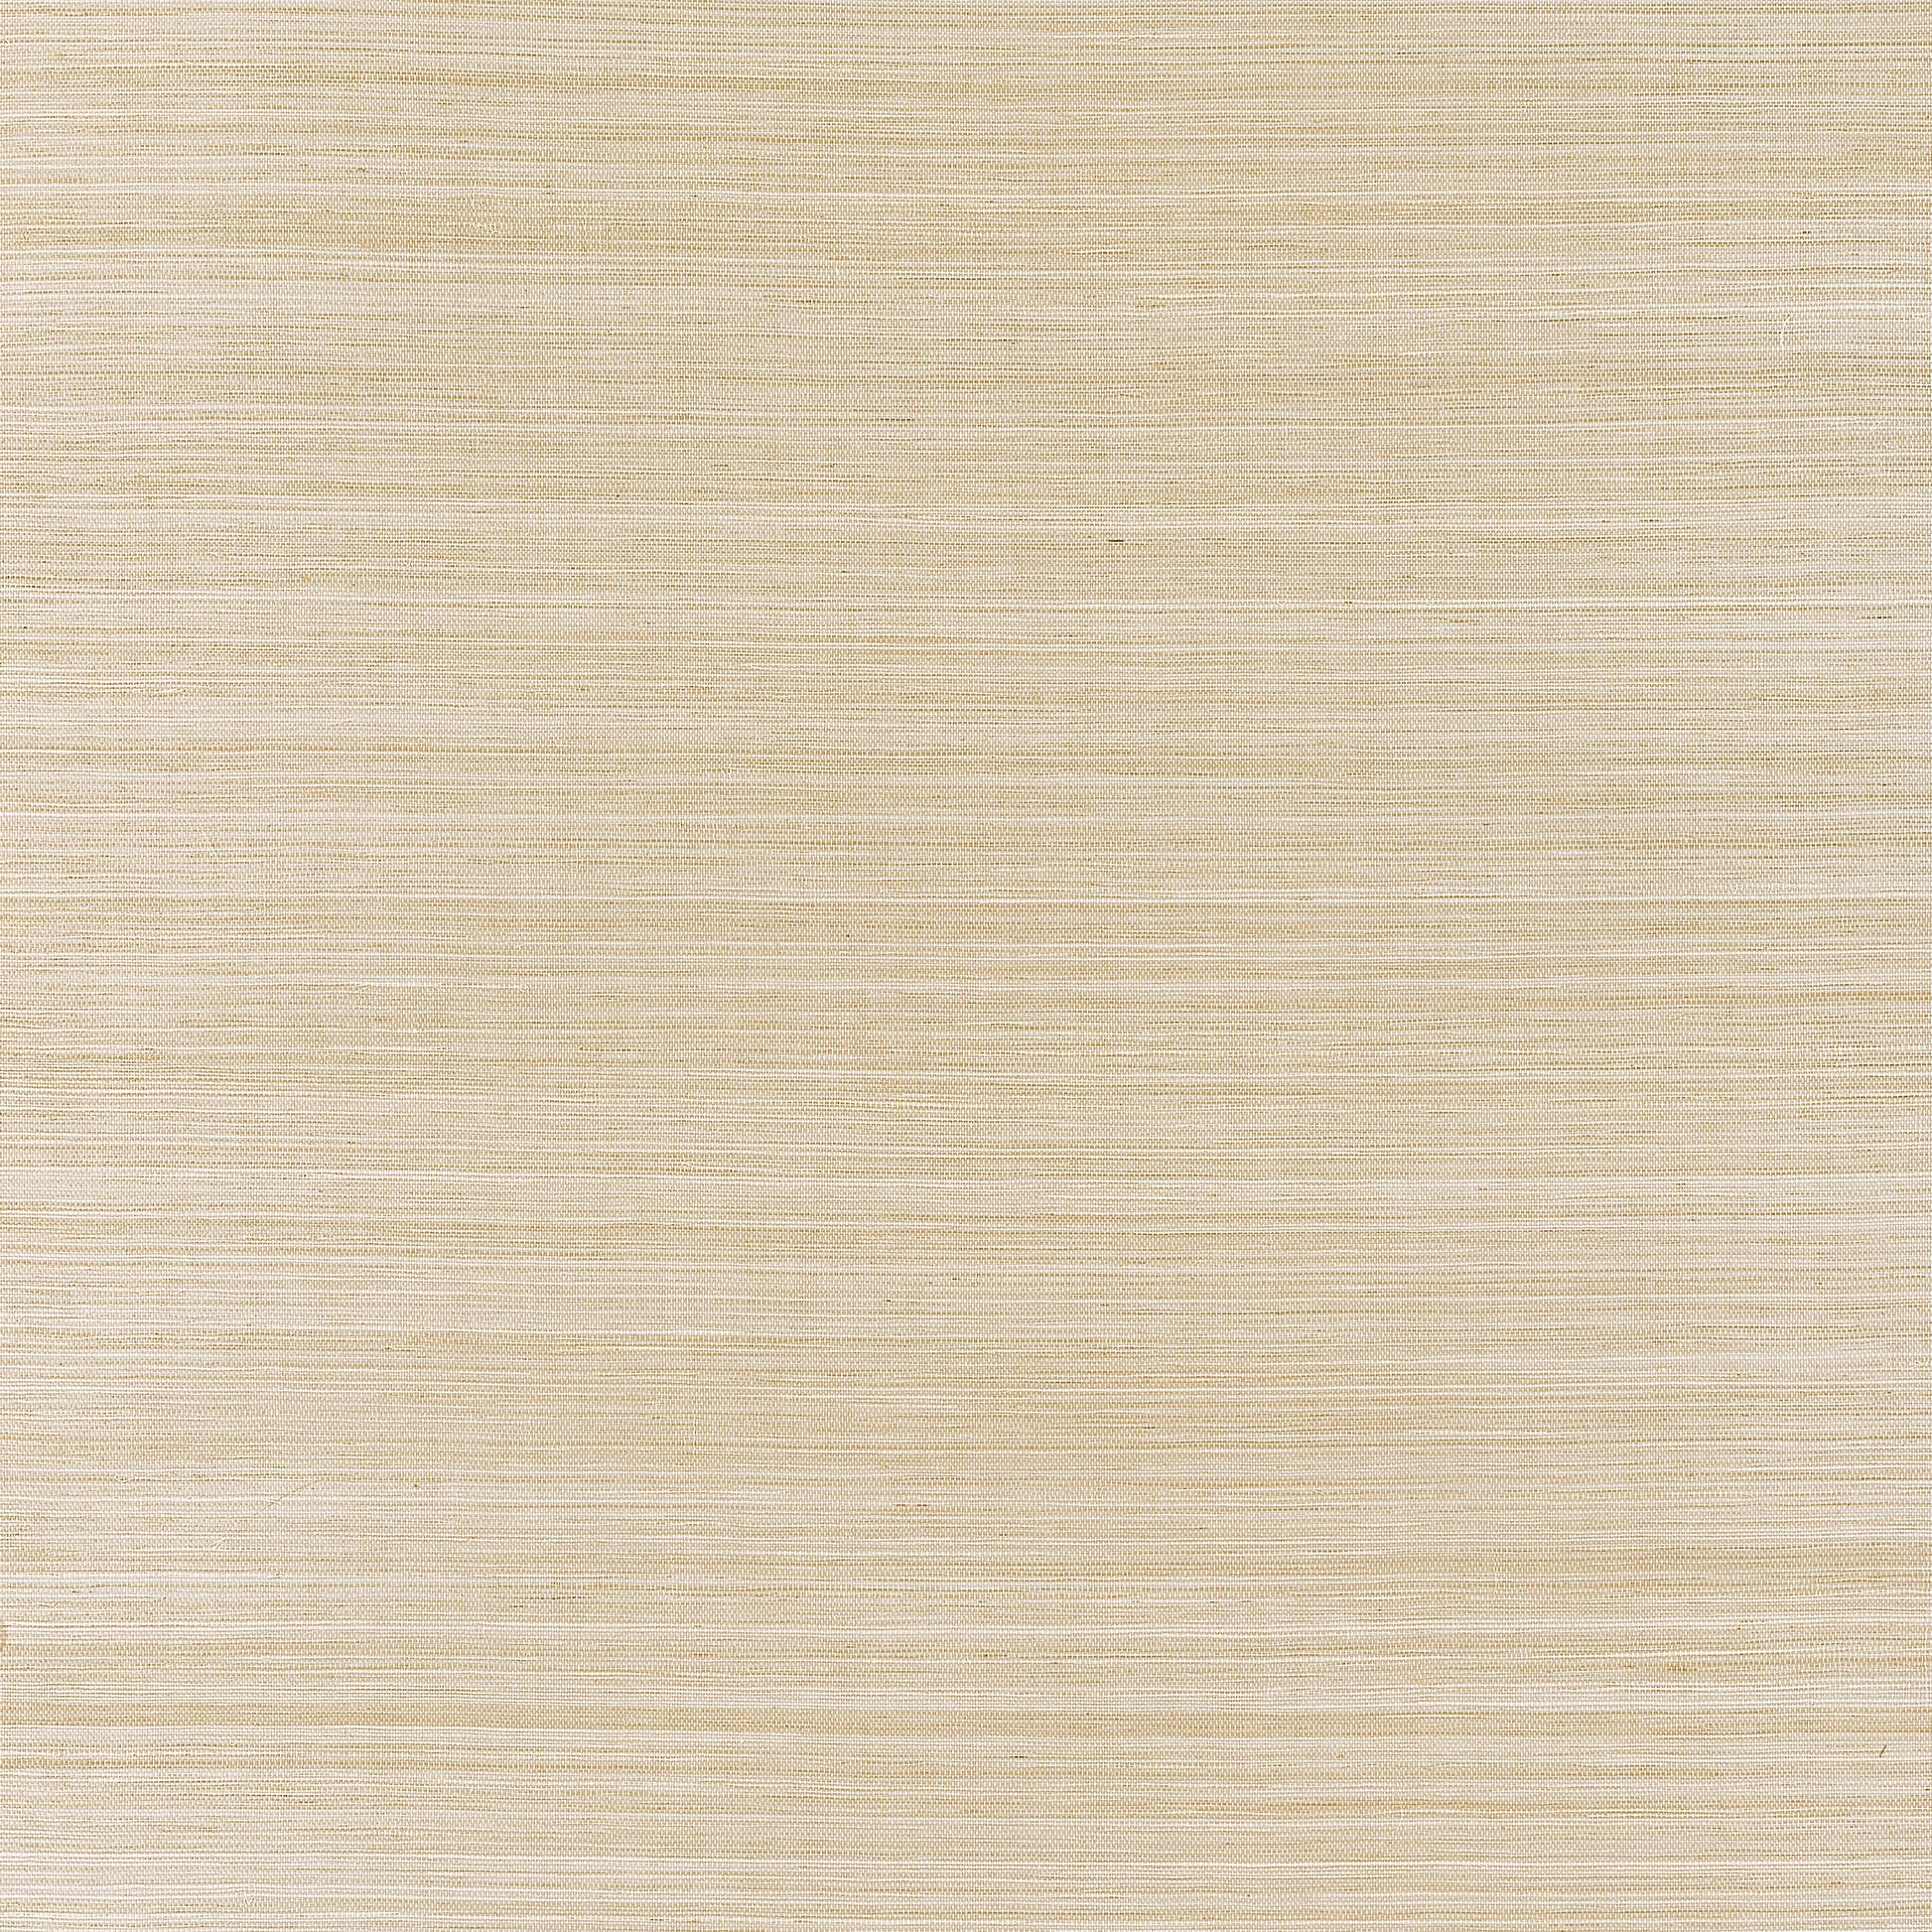 Purchase Thibaut Wallpaper Product T19673 pattern name Windward Sisal color Tan. 